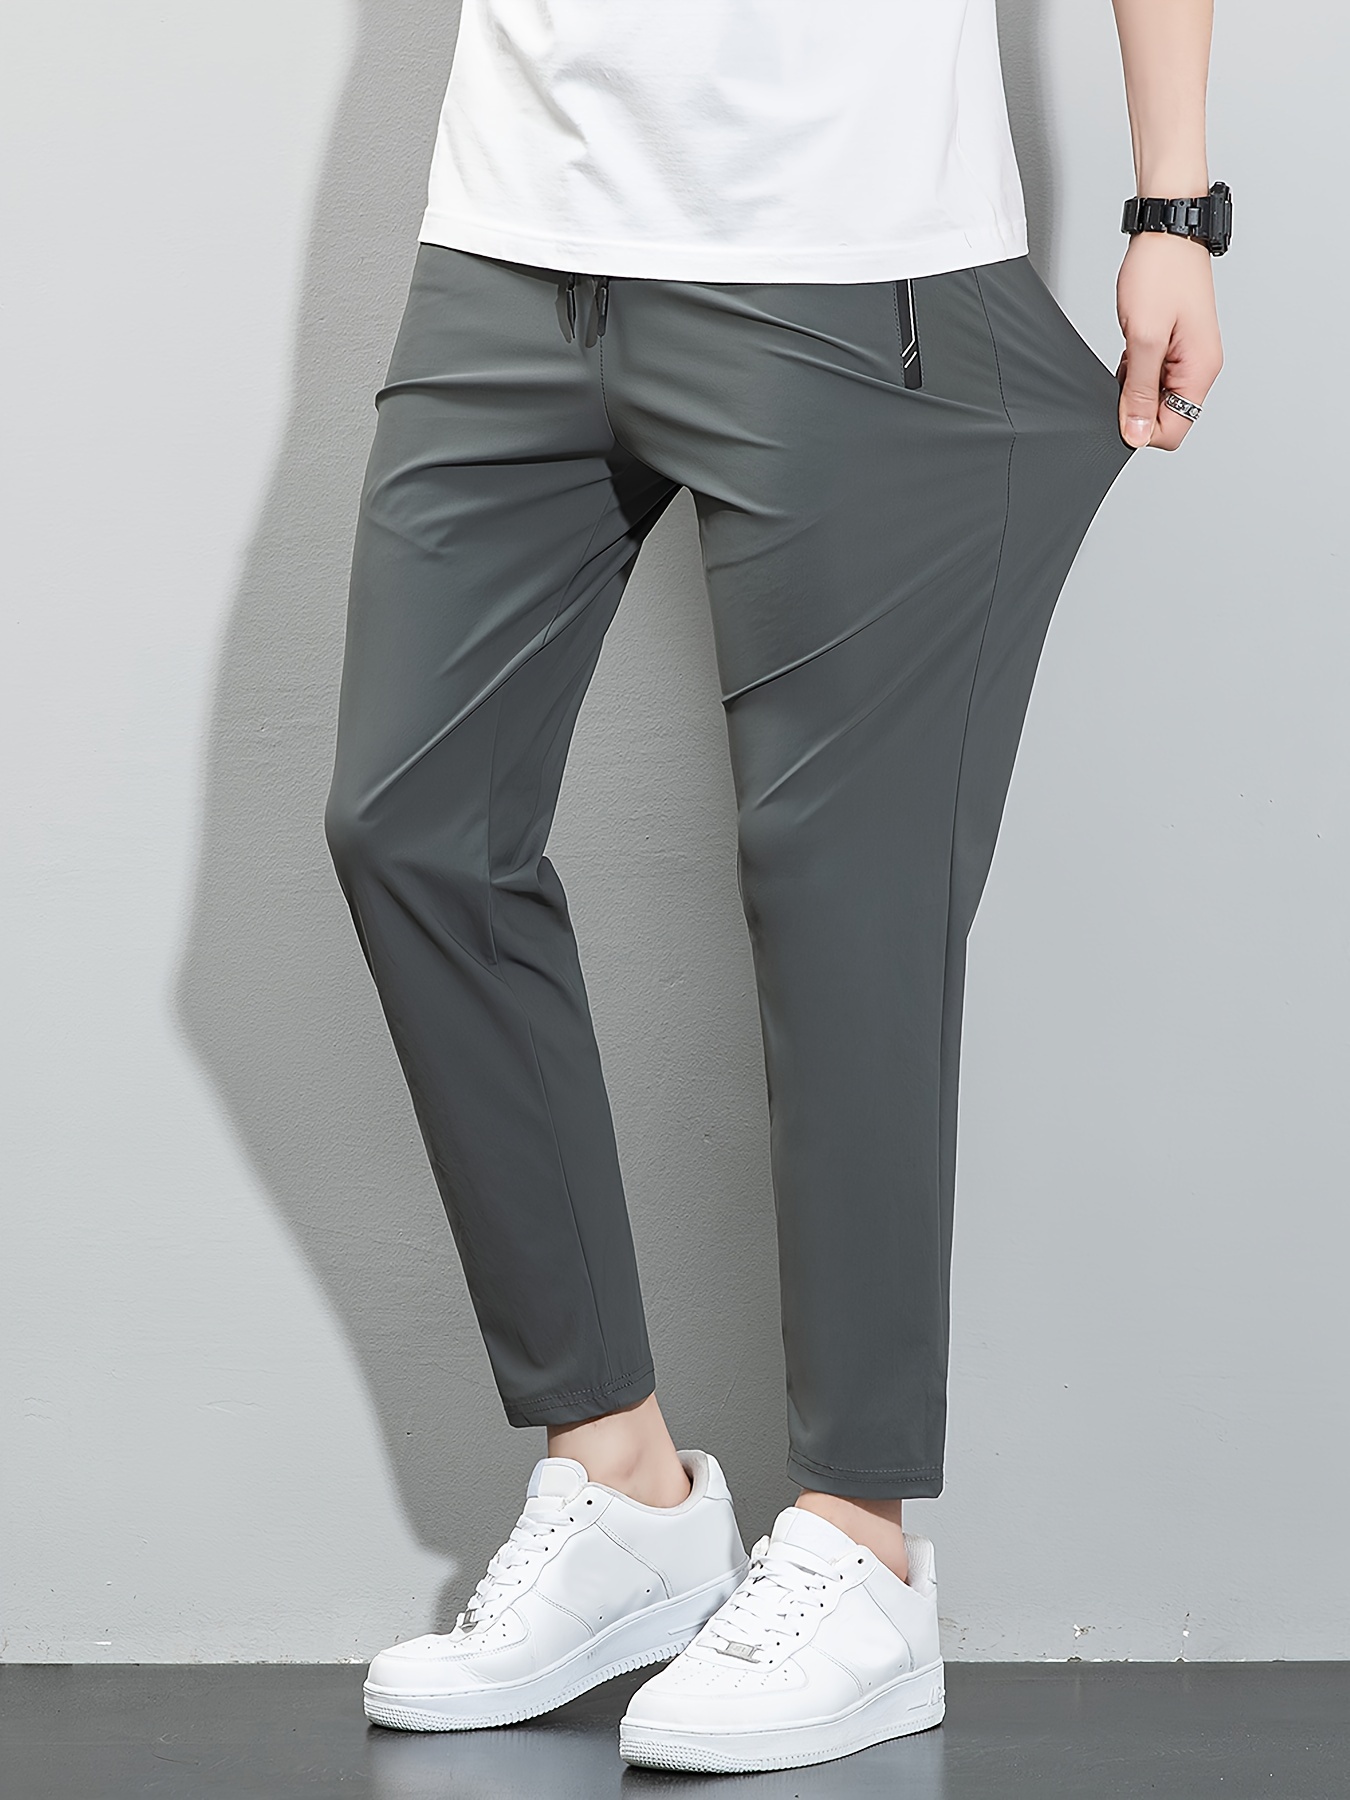 Mens Ultra-Stretch Sports Trousers - Classic Regular Fit, Secure Inner Zipper Pockets, Perfect for Warm Weather Fitness and Outdoor Activities